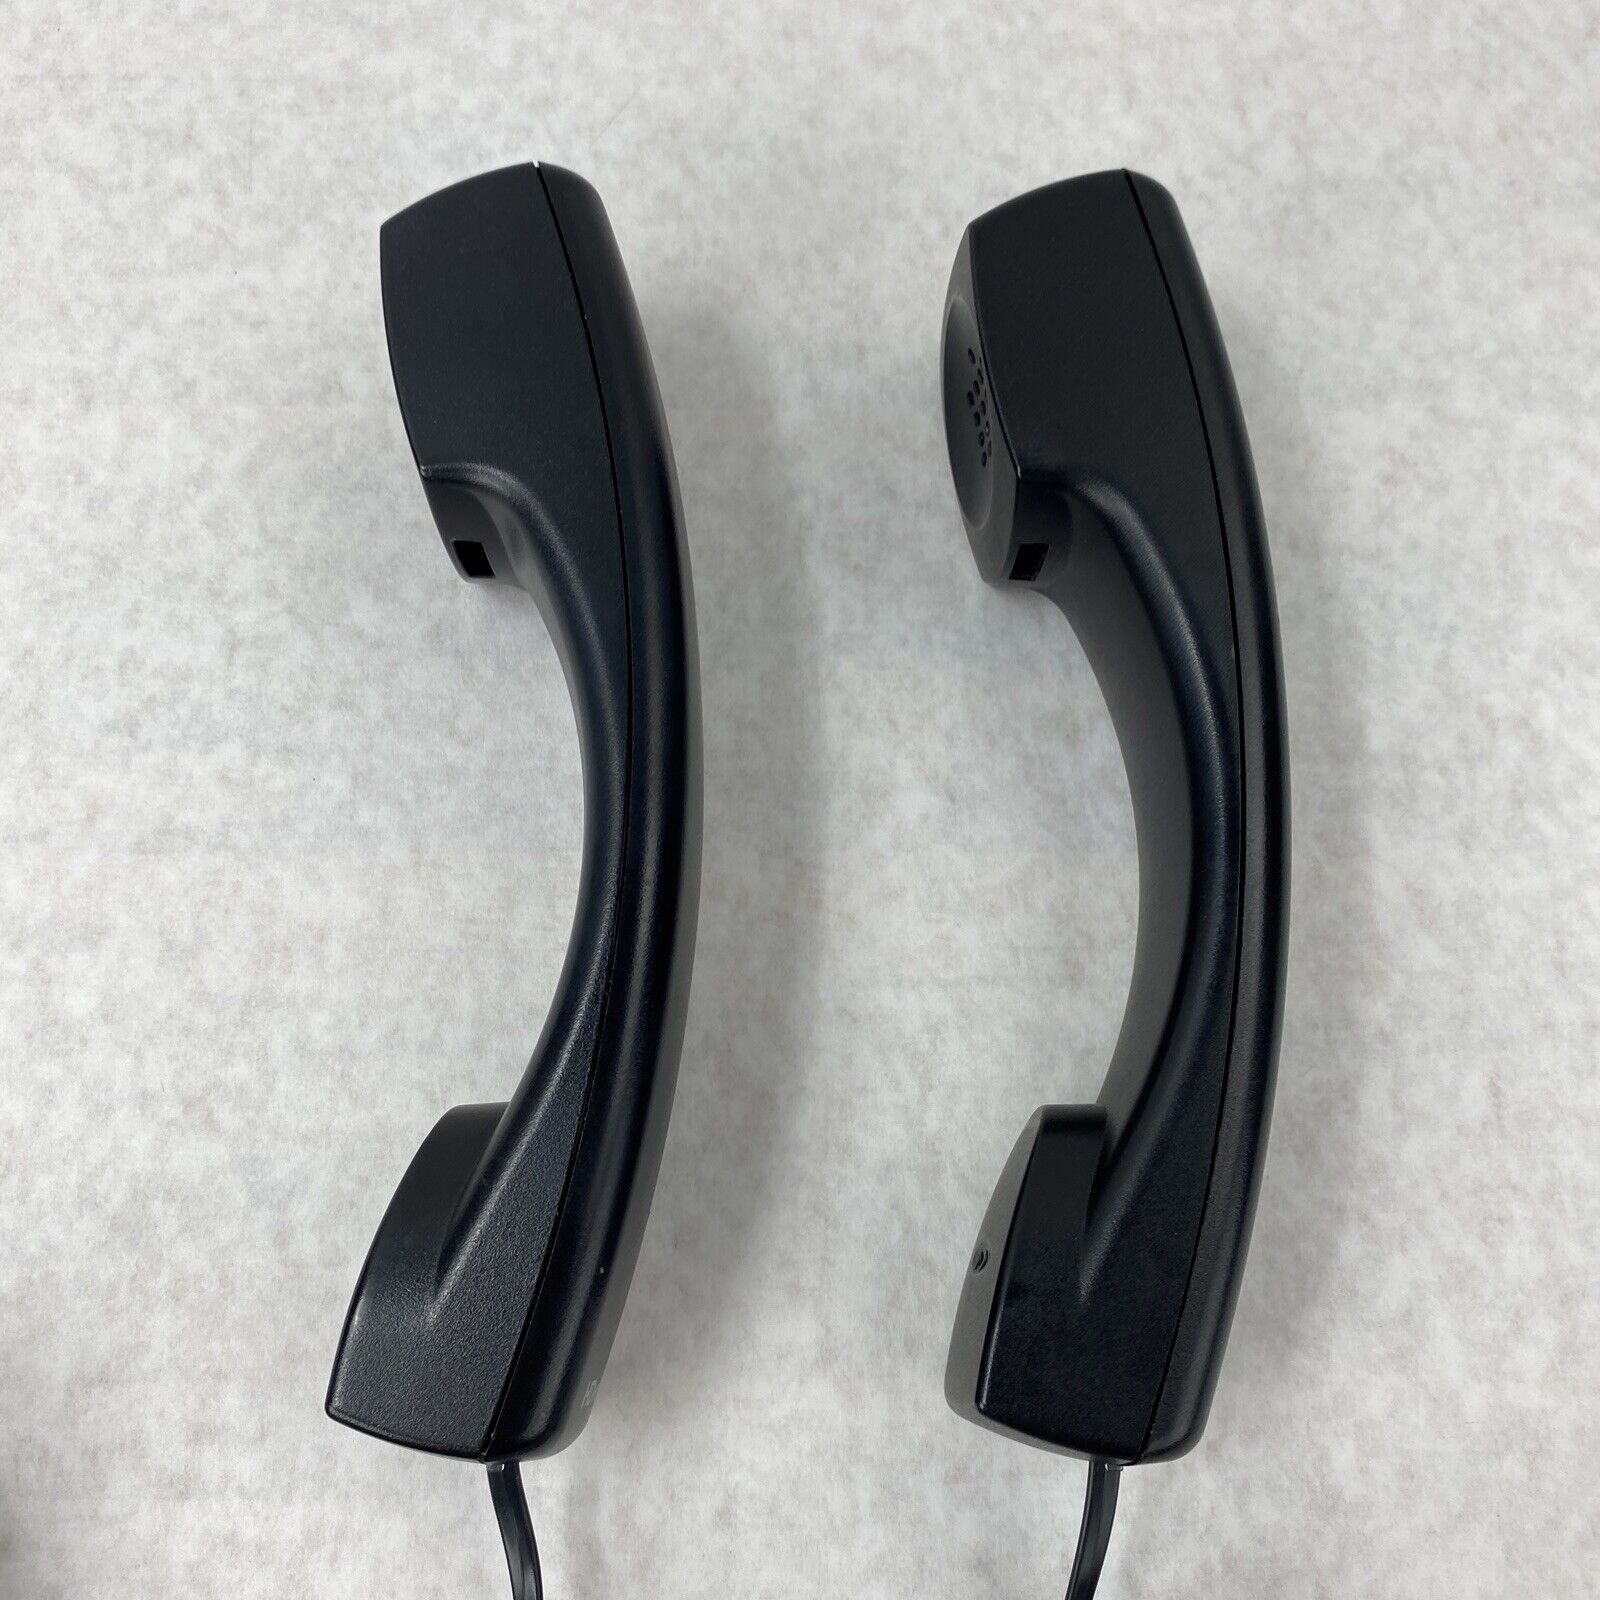 Lot of 2 Polycom HD Voice Office Telephone w/ Cord